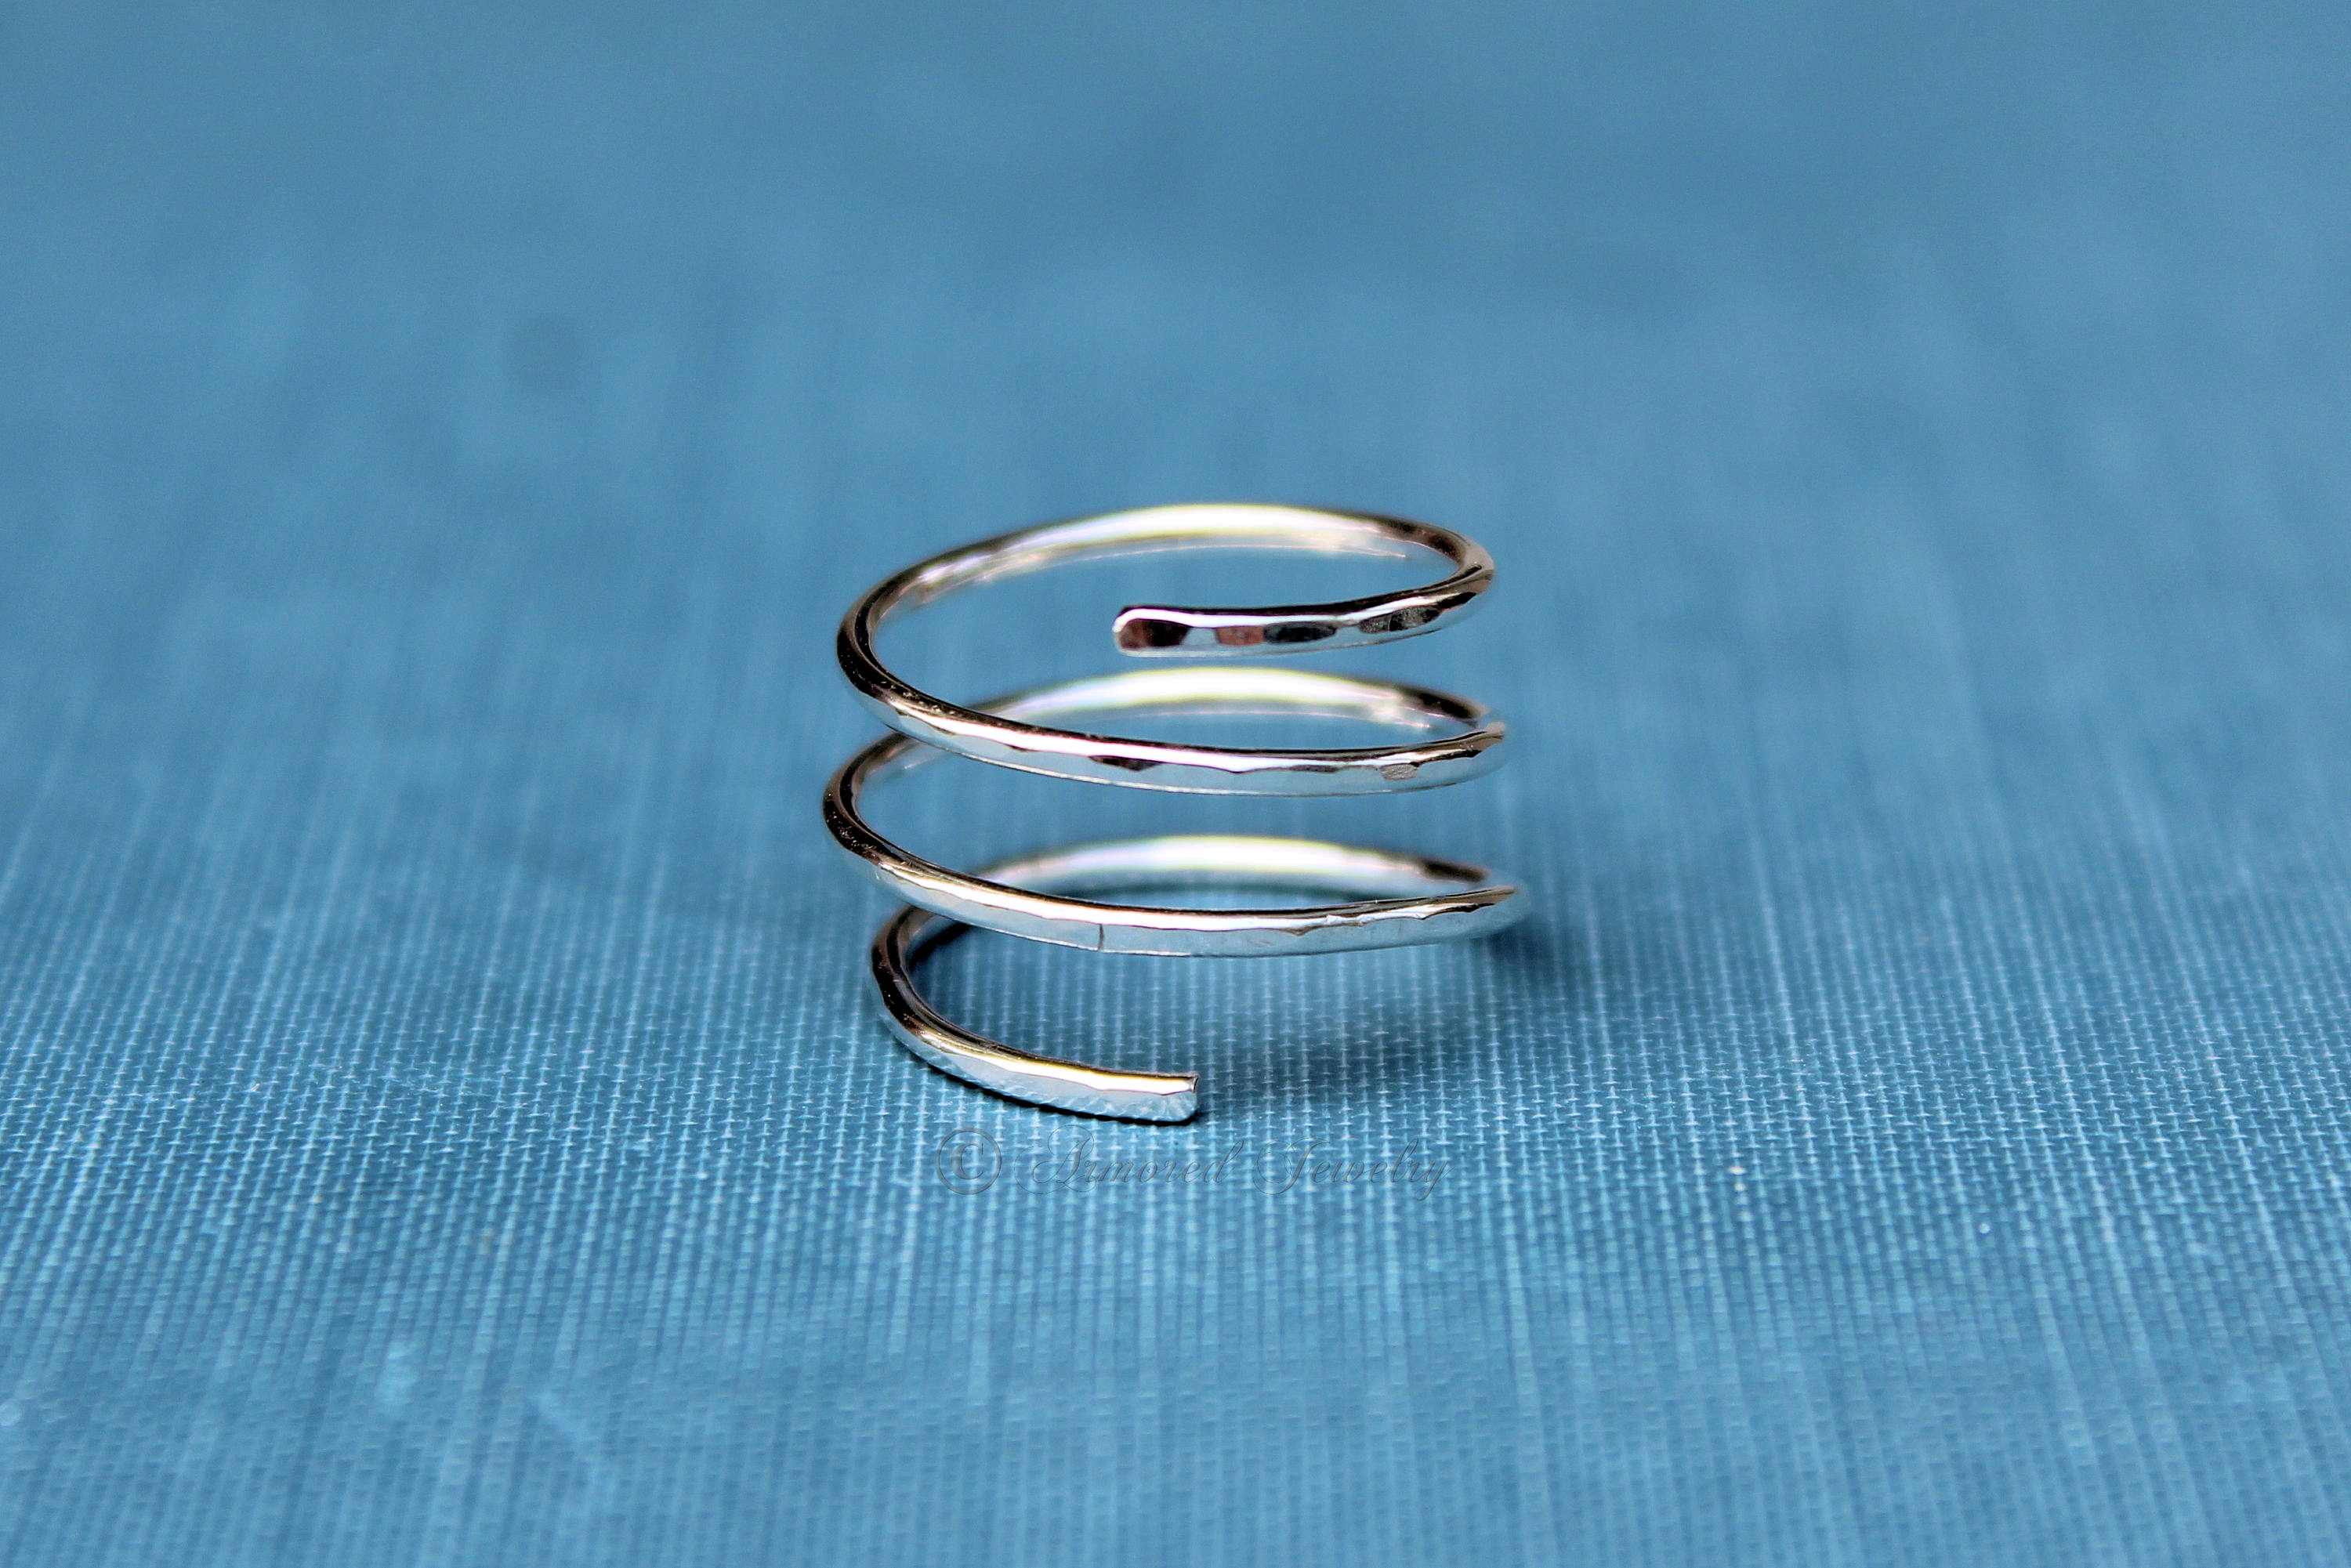 Spiral Ring, Sterling Silver or Gold-Filled, Wholesale Ring, Blank Band Ring, Silver Band Ring, Design Your Ring, DIY Jewelry, Ring Blanks